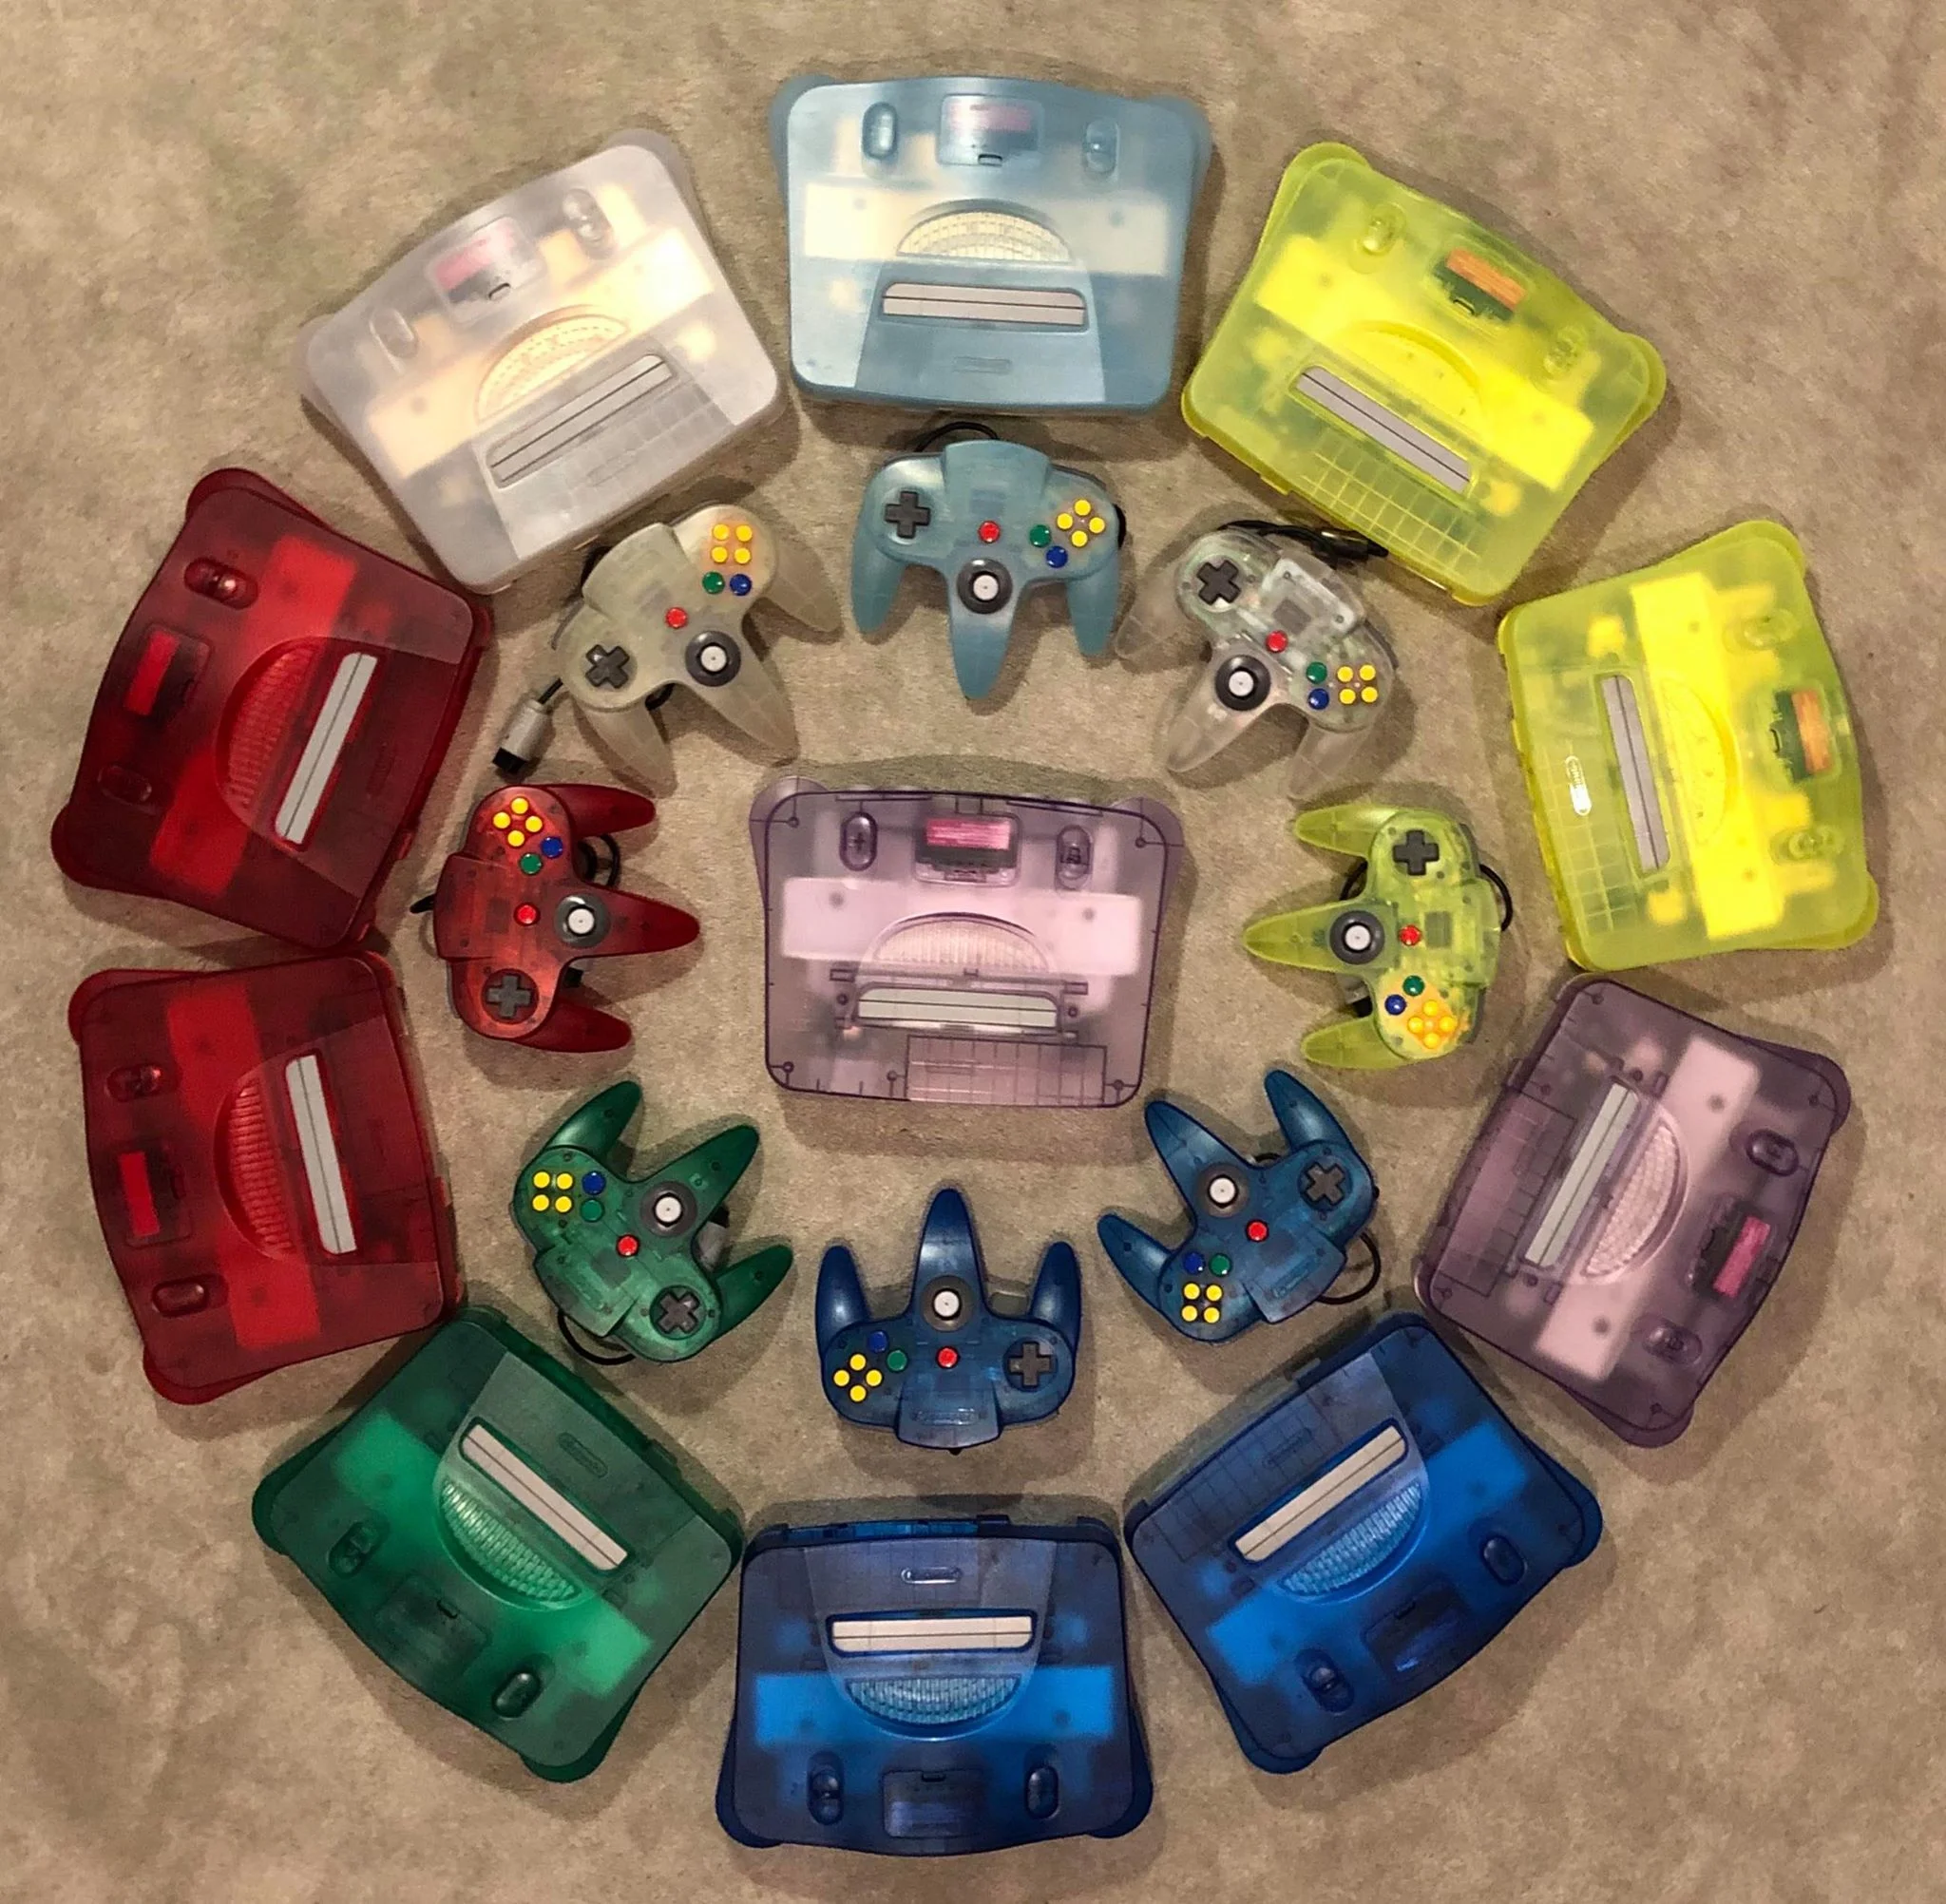 All Nintendo 64 Prototype Consoles and Controllers